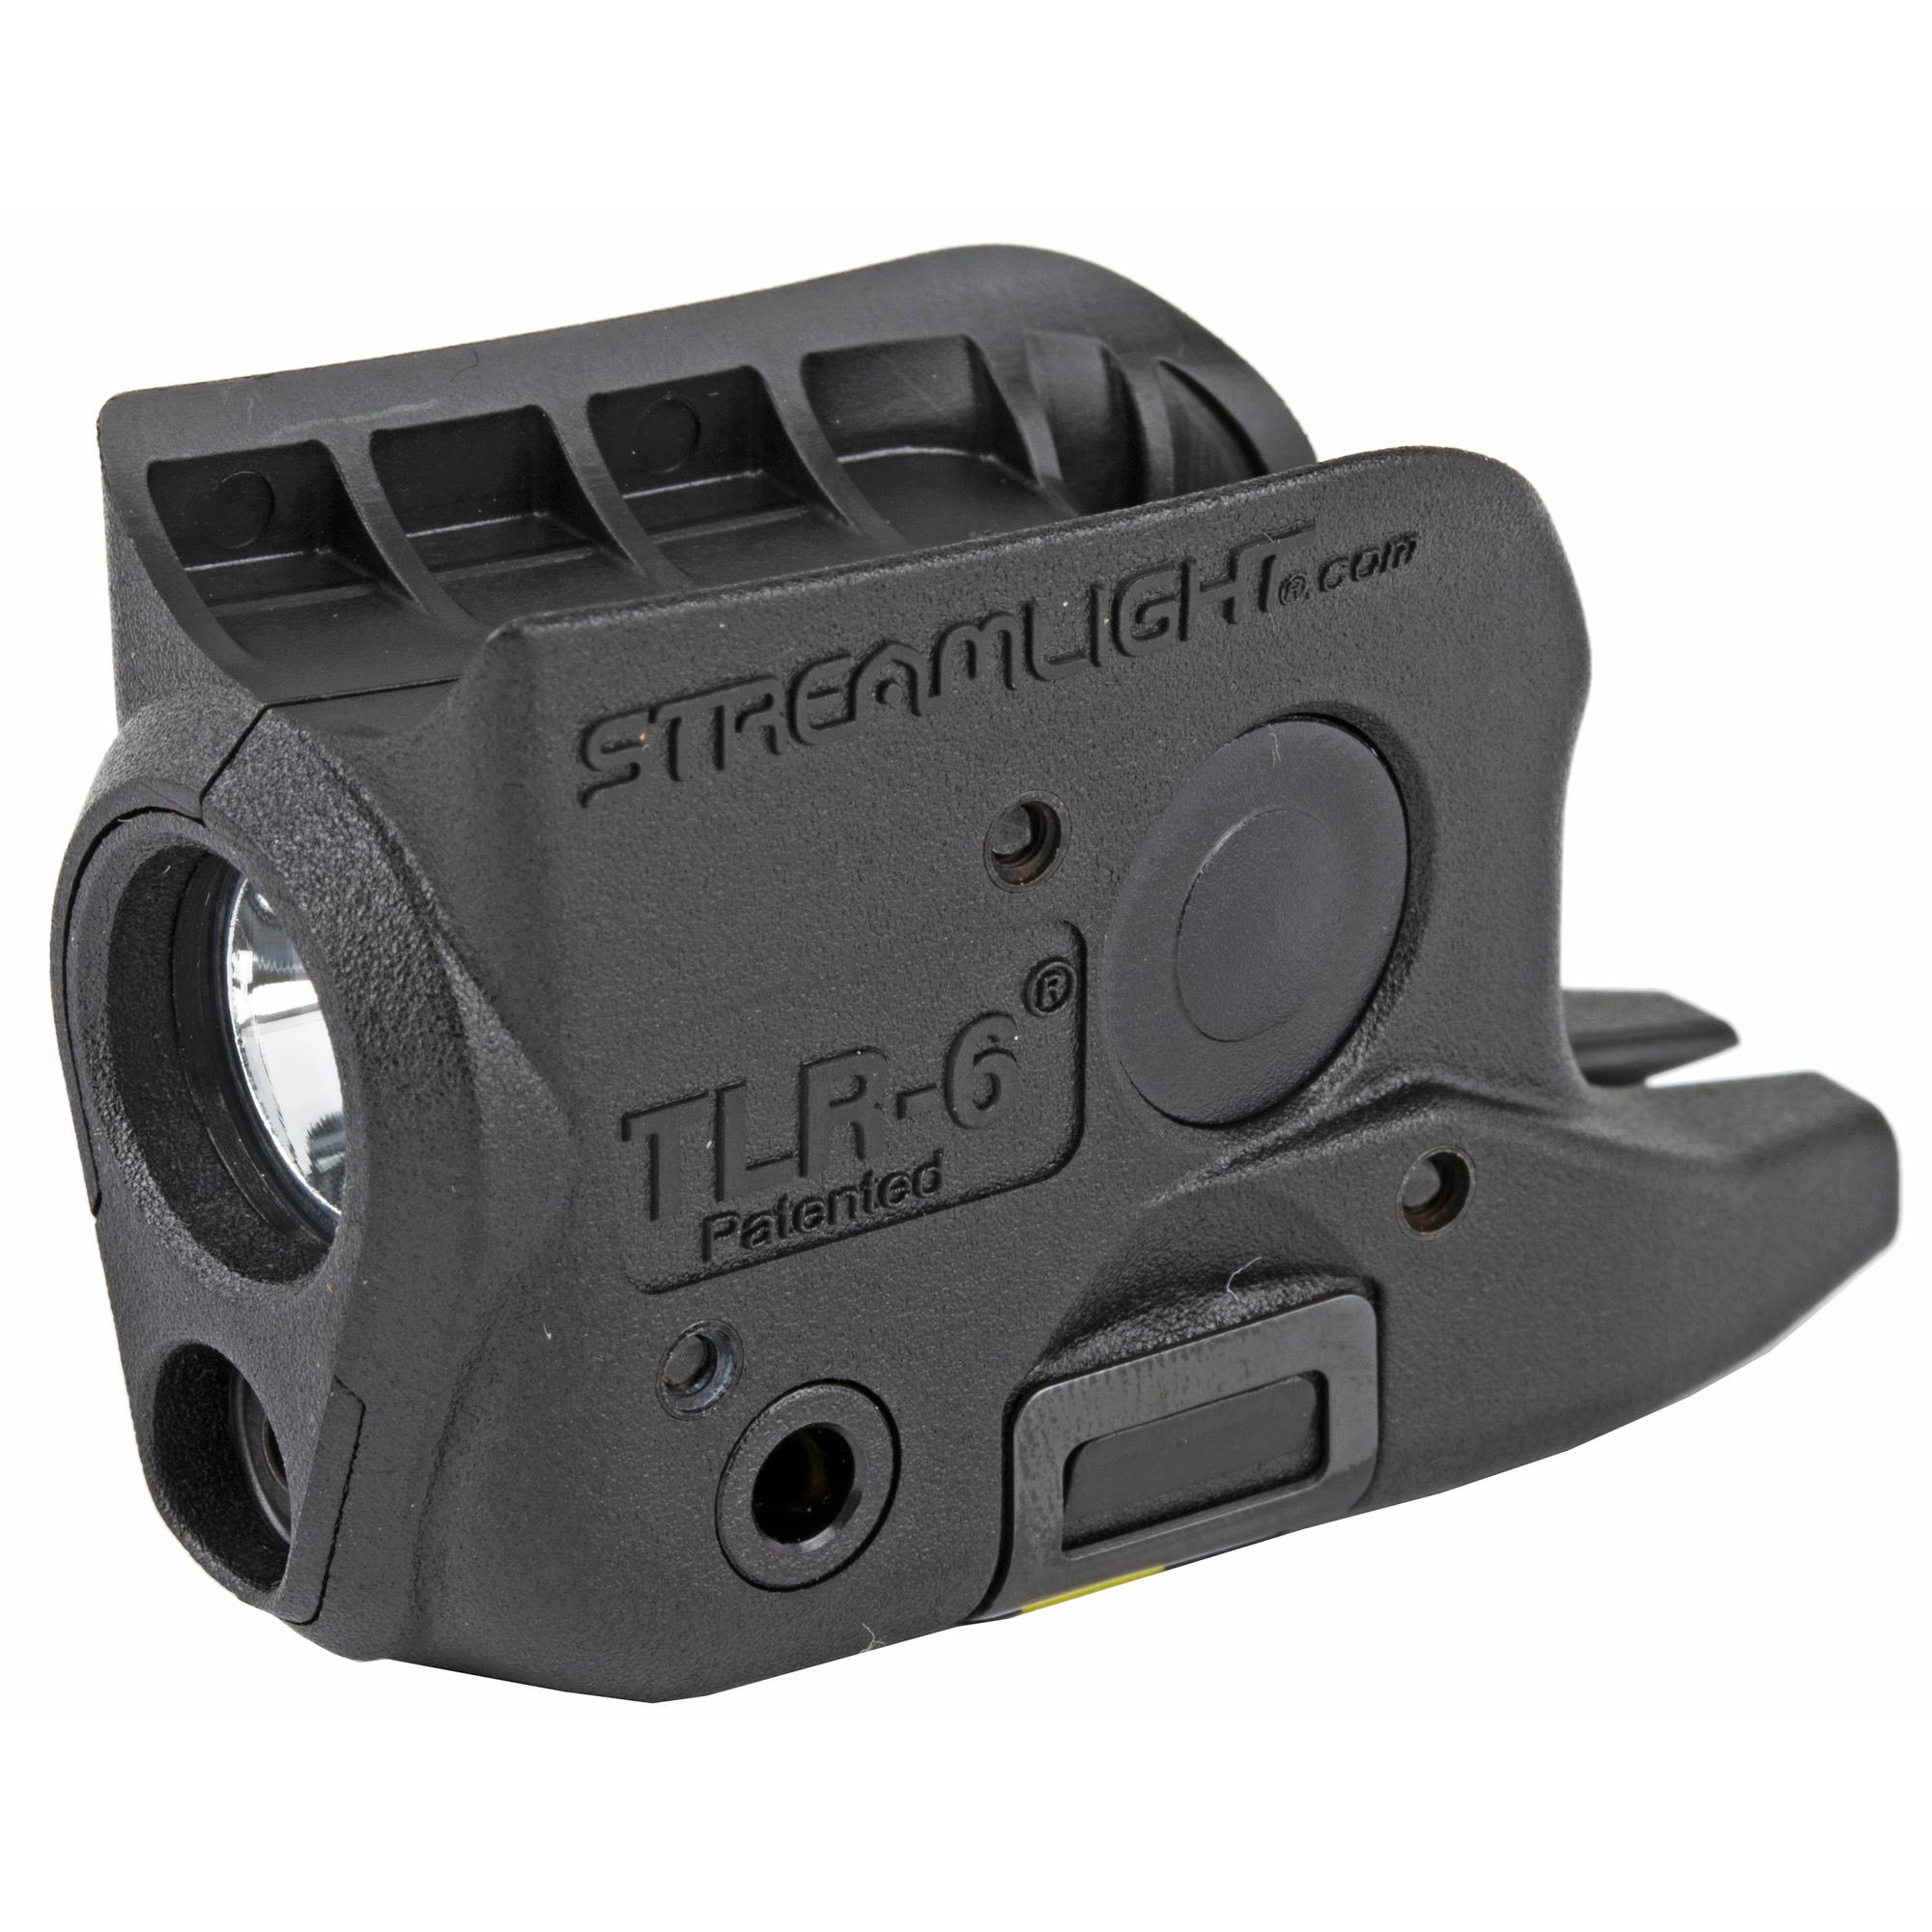 Tlr-6 Light Laser Subcompact